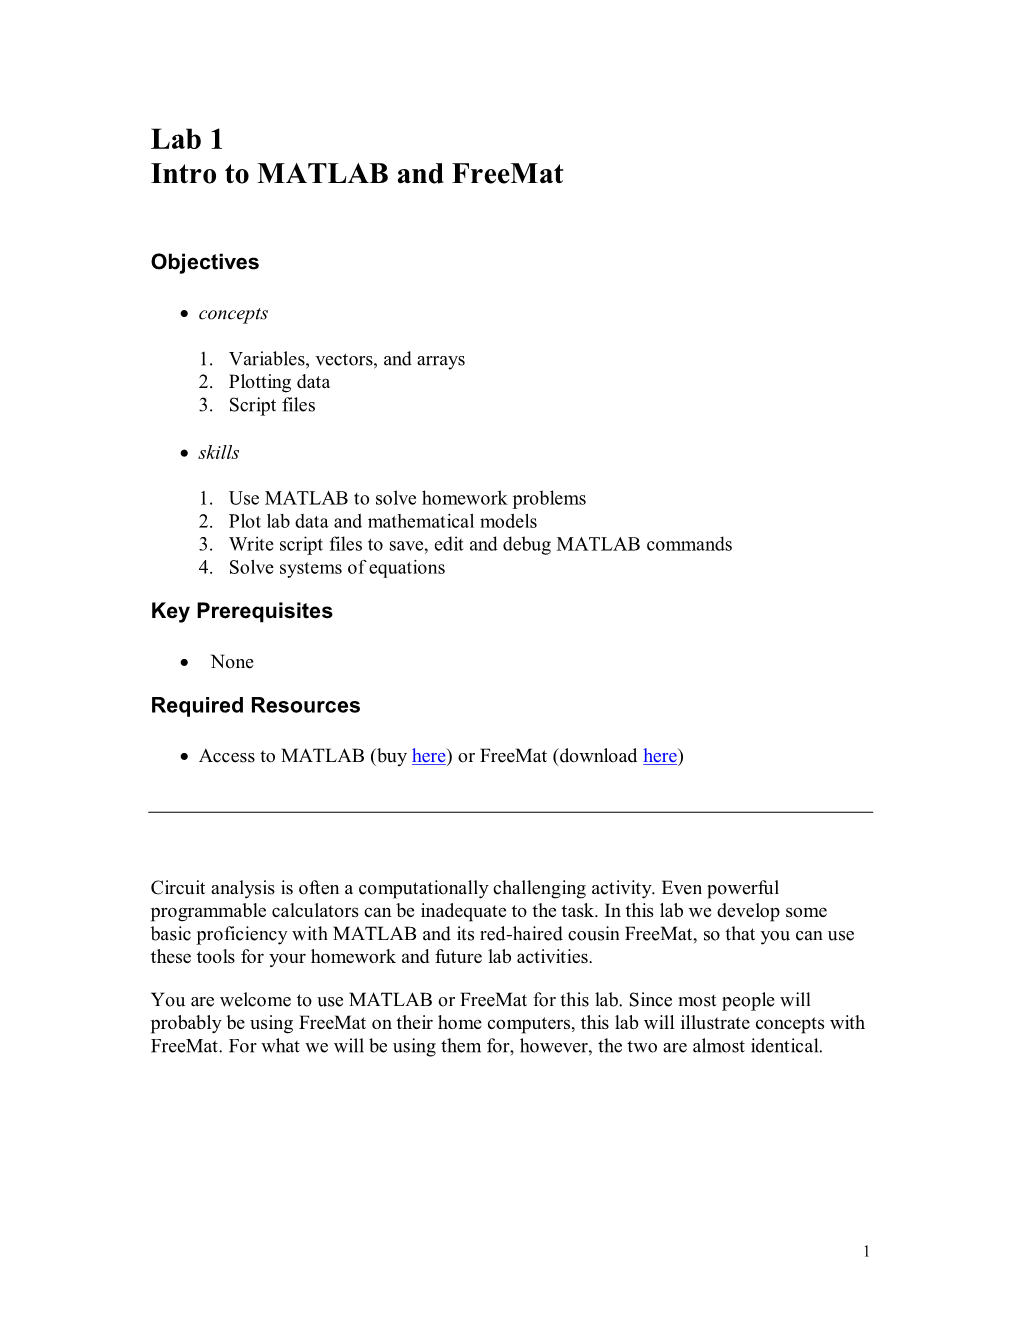 Lab 1 Intro to MATLAB and Freemat